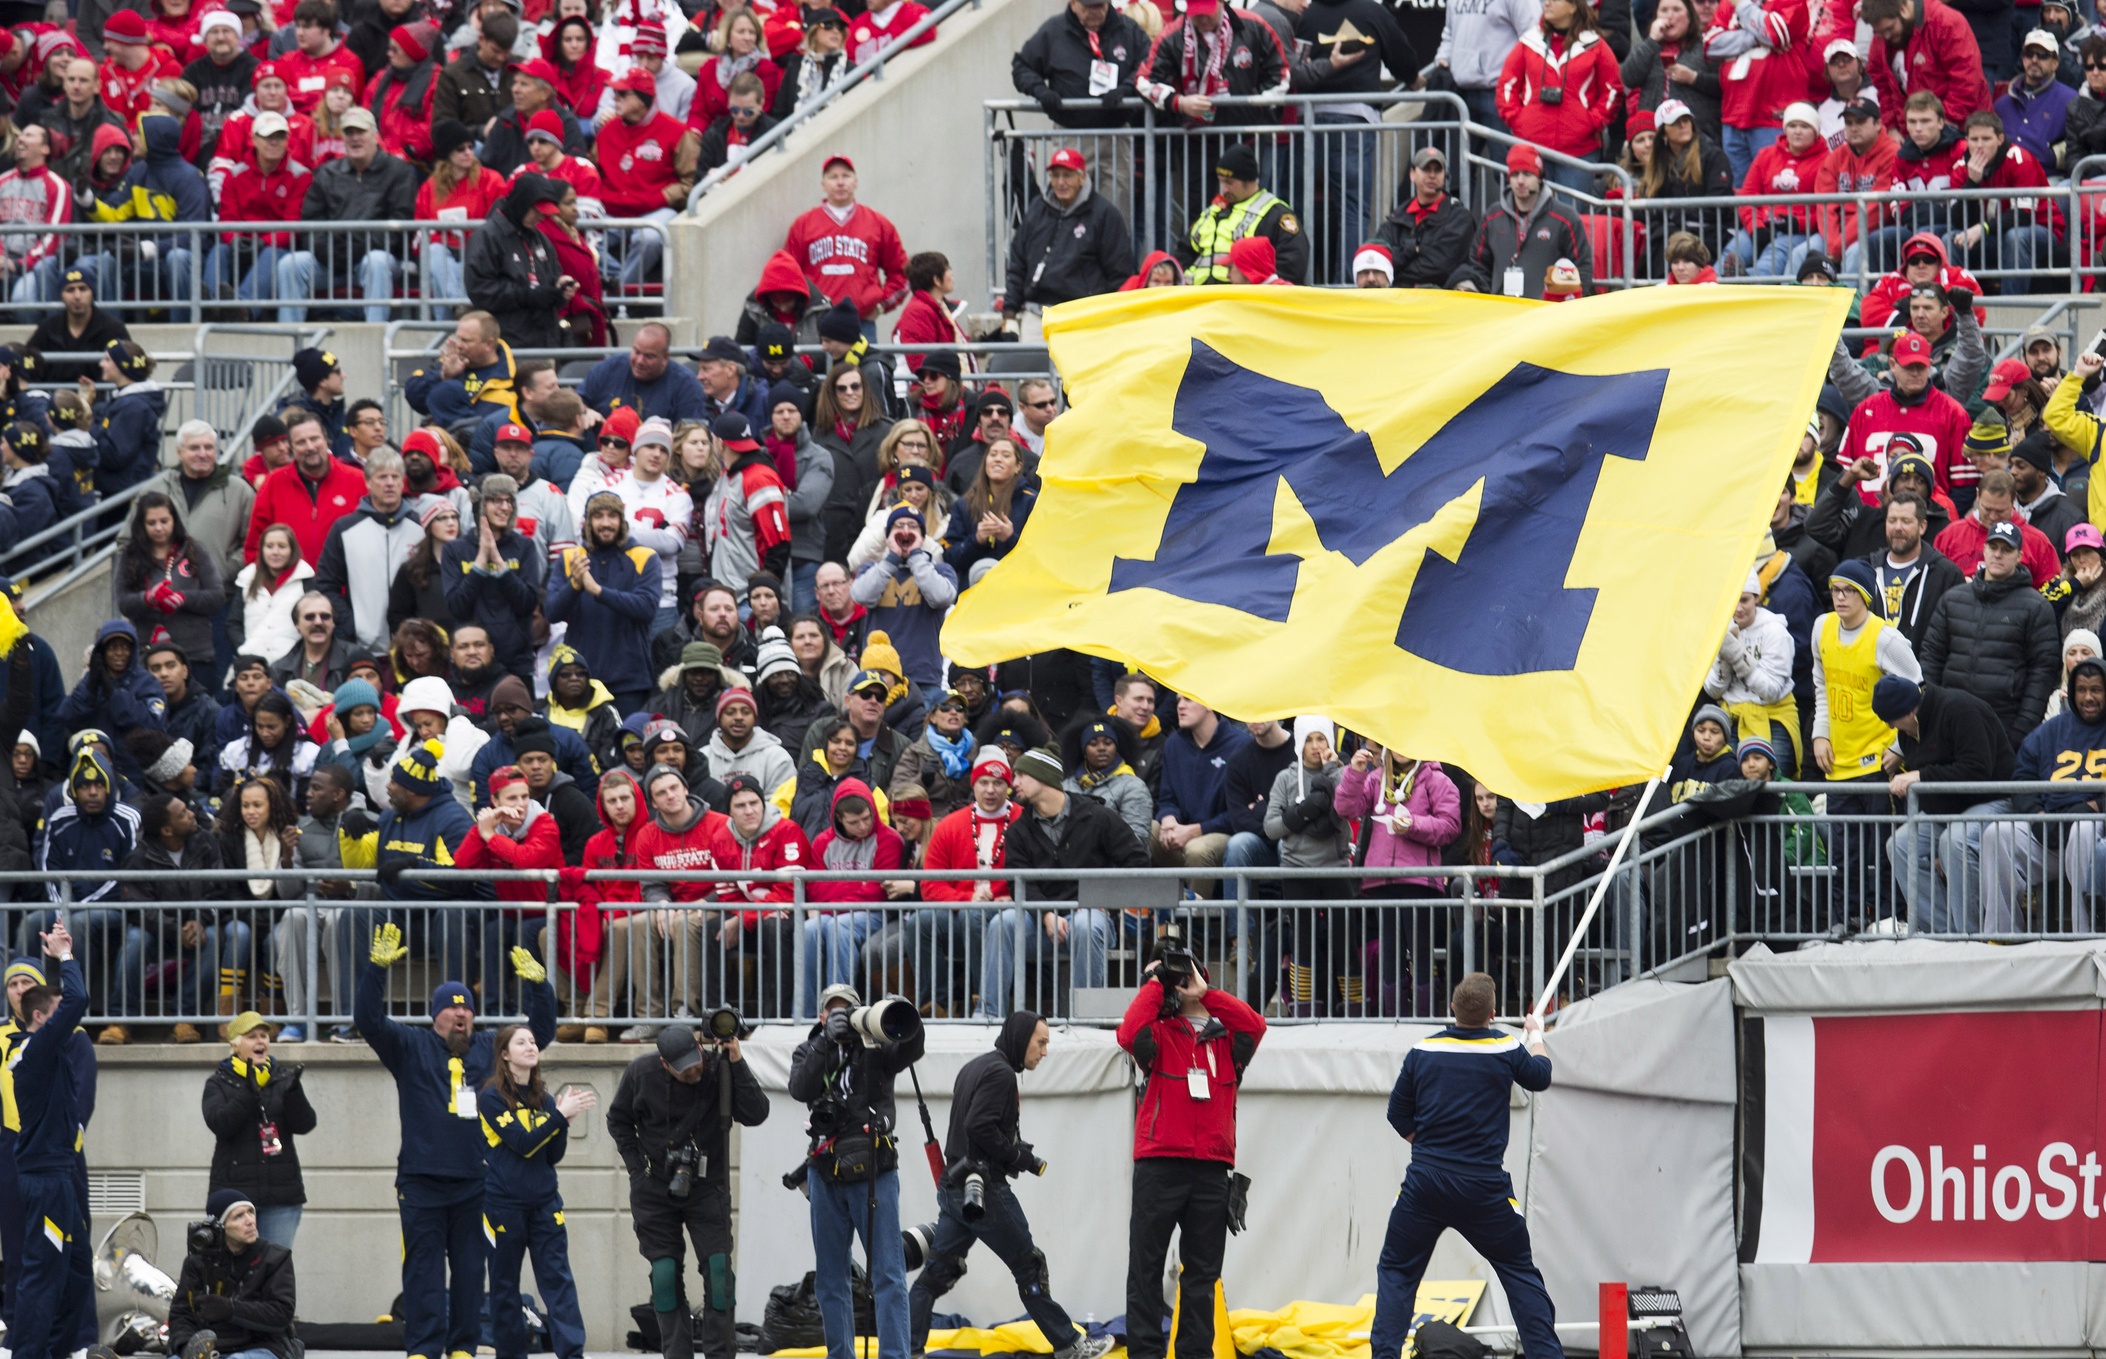 The Michigan-Ohio State rivalry is one young Ivan Applin takes seriously. (USATSI)